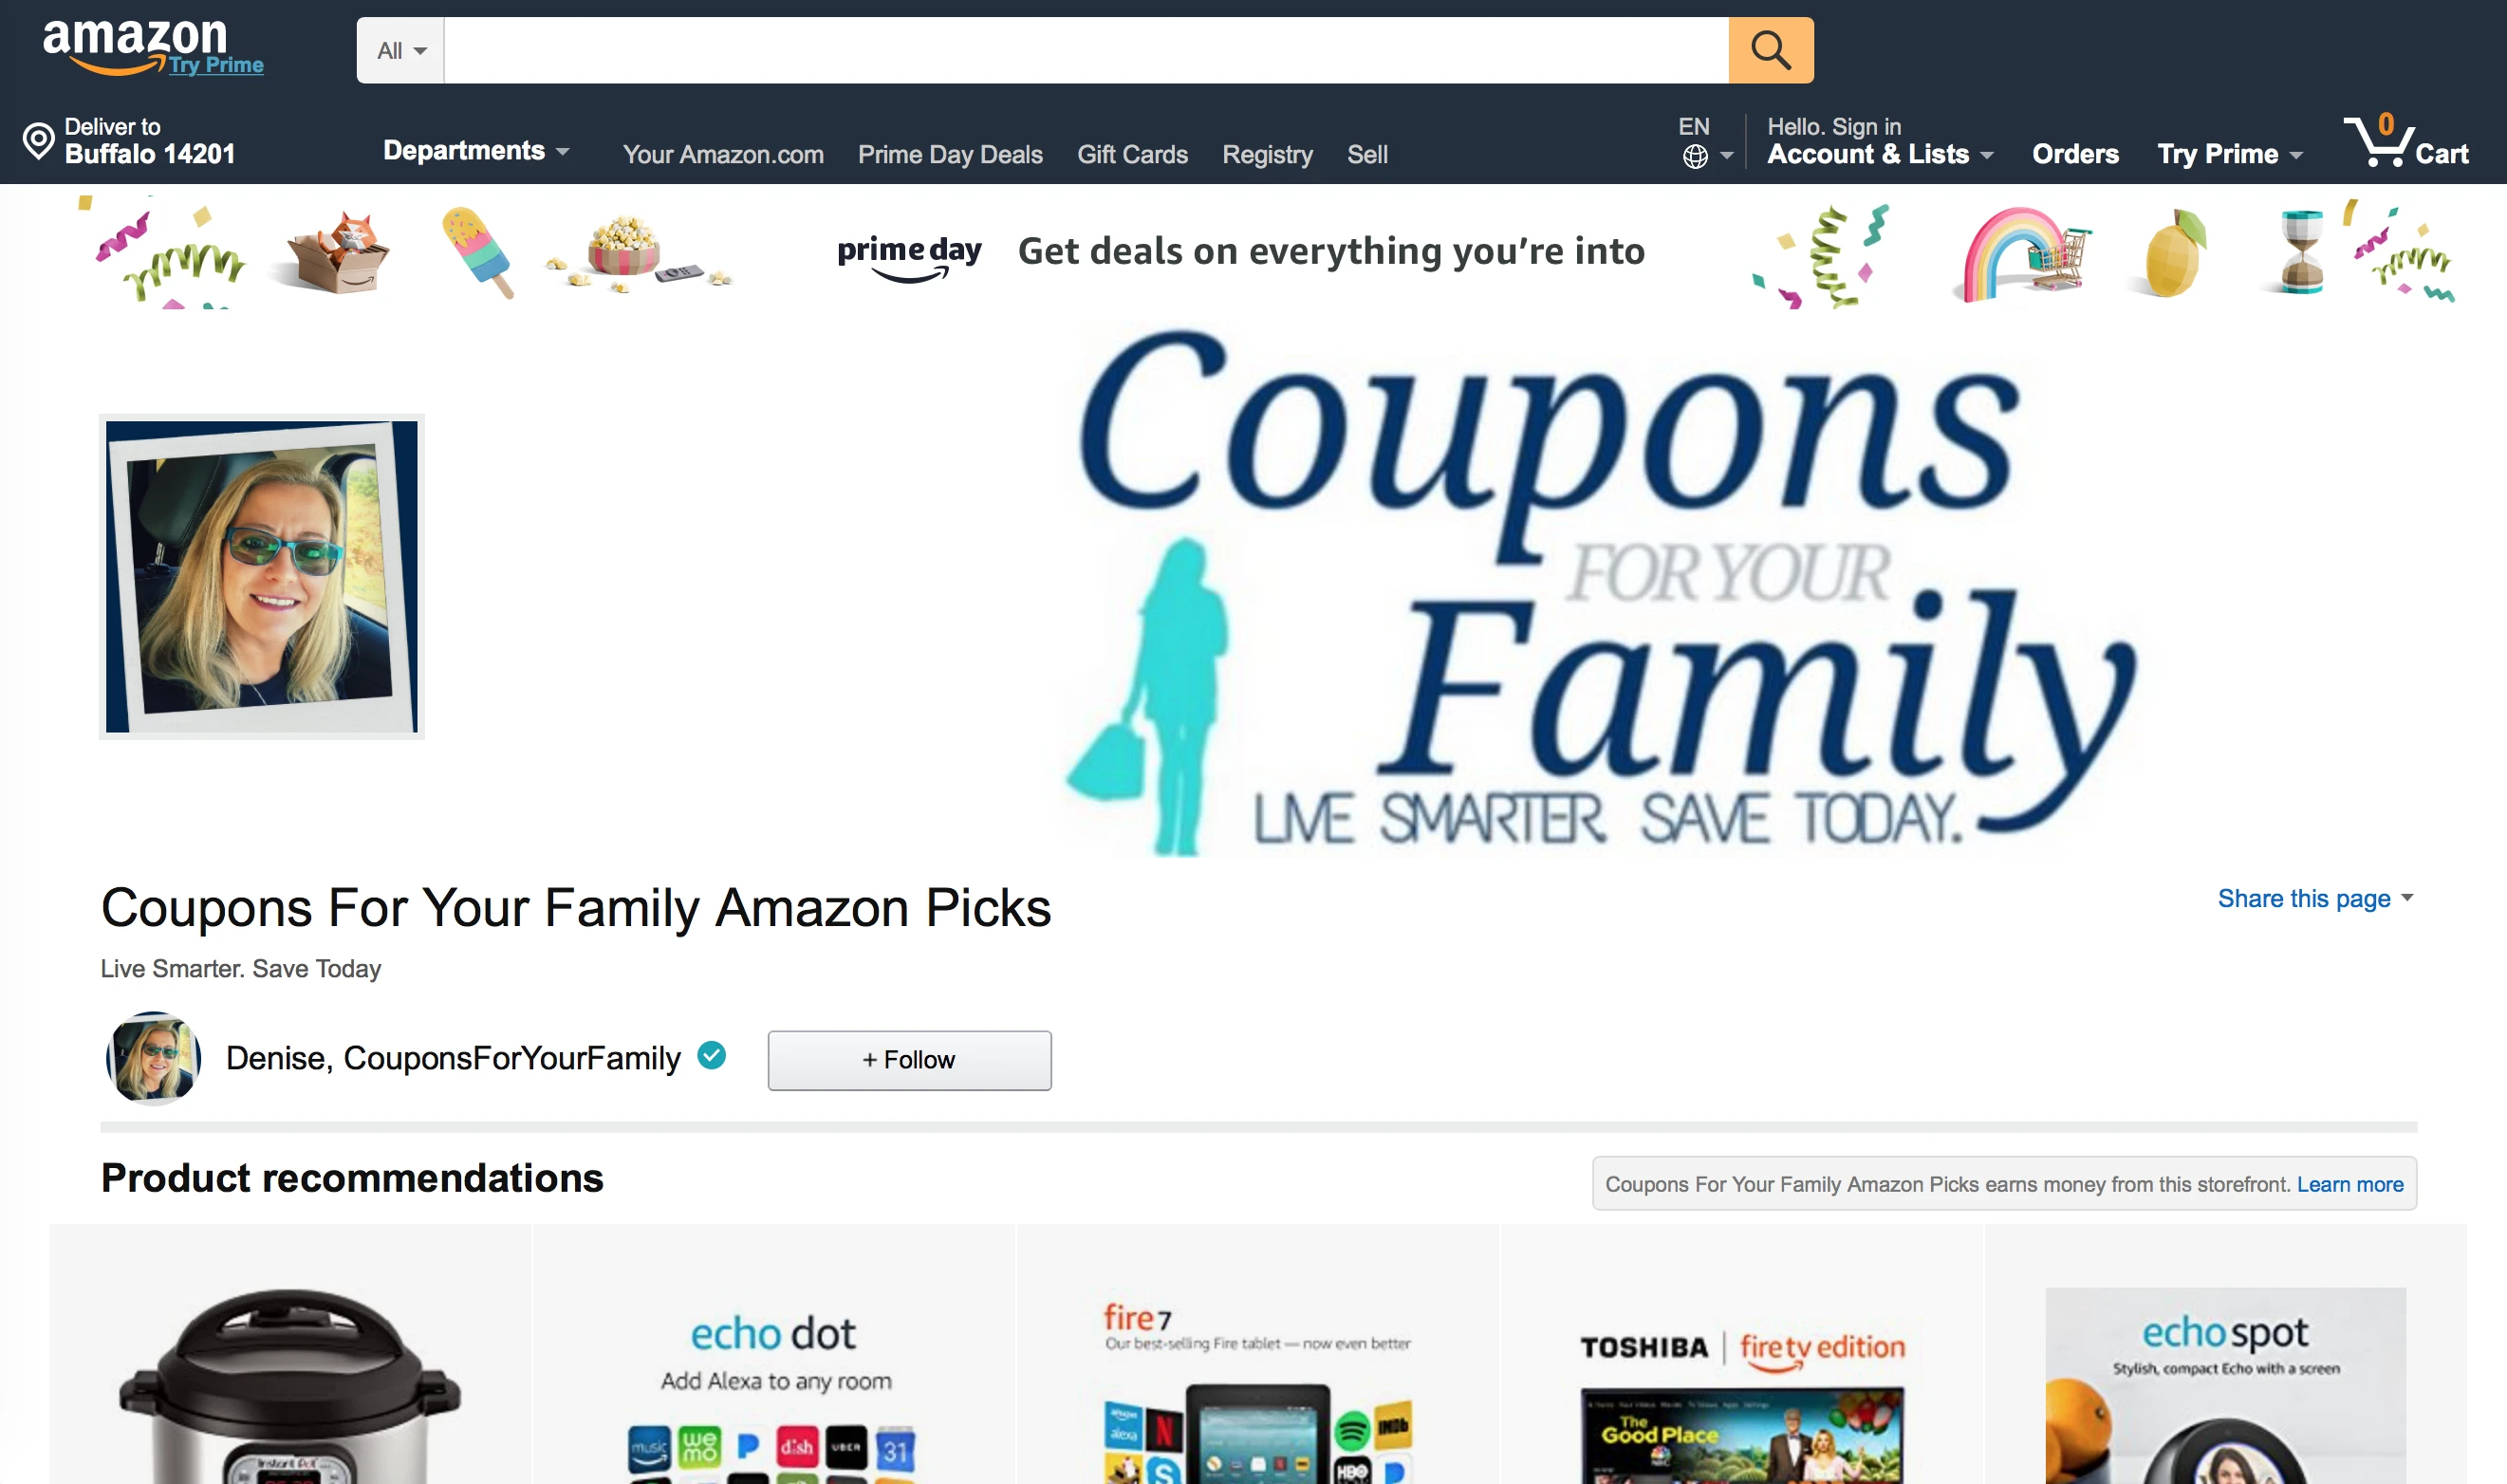 Coupons For Your Family Amazon Storefront